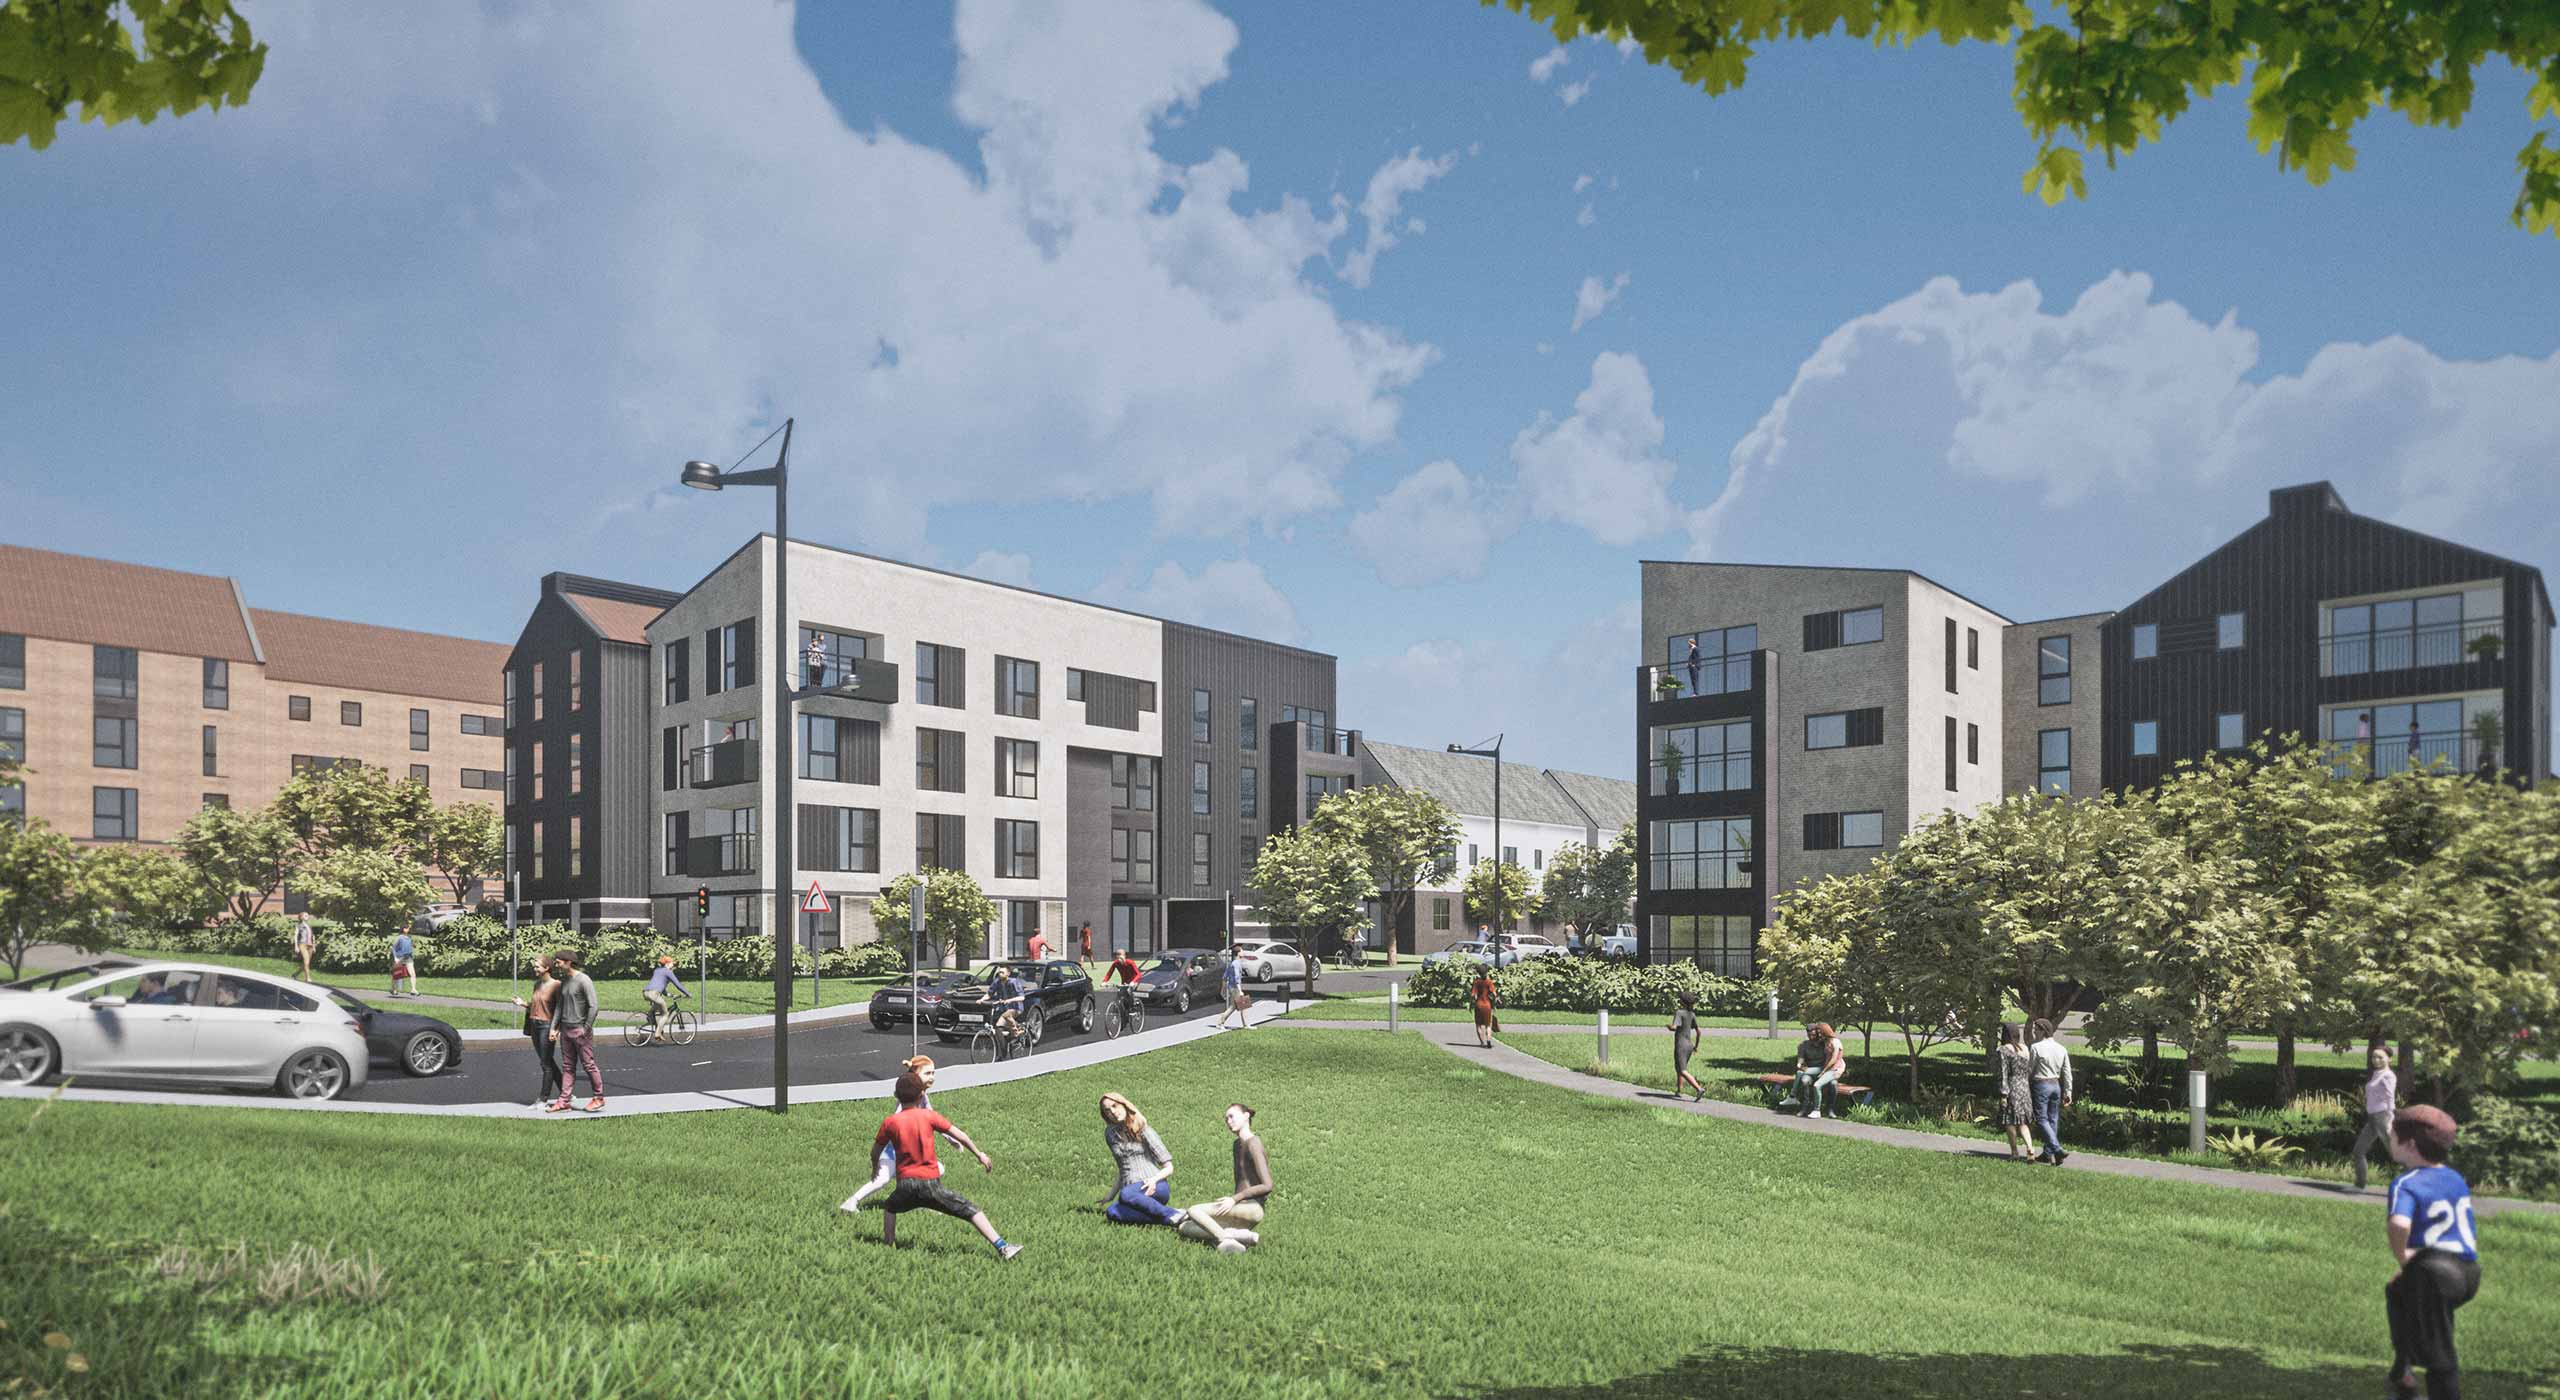 Planning Approval for 227 units